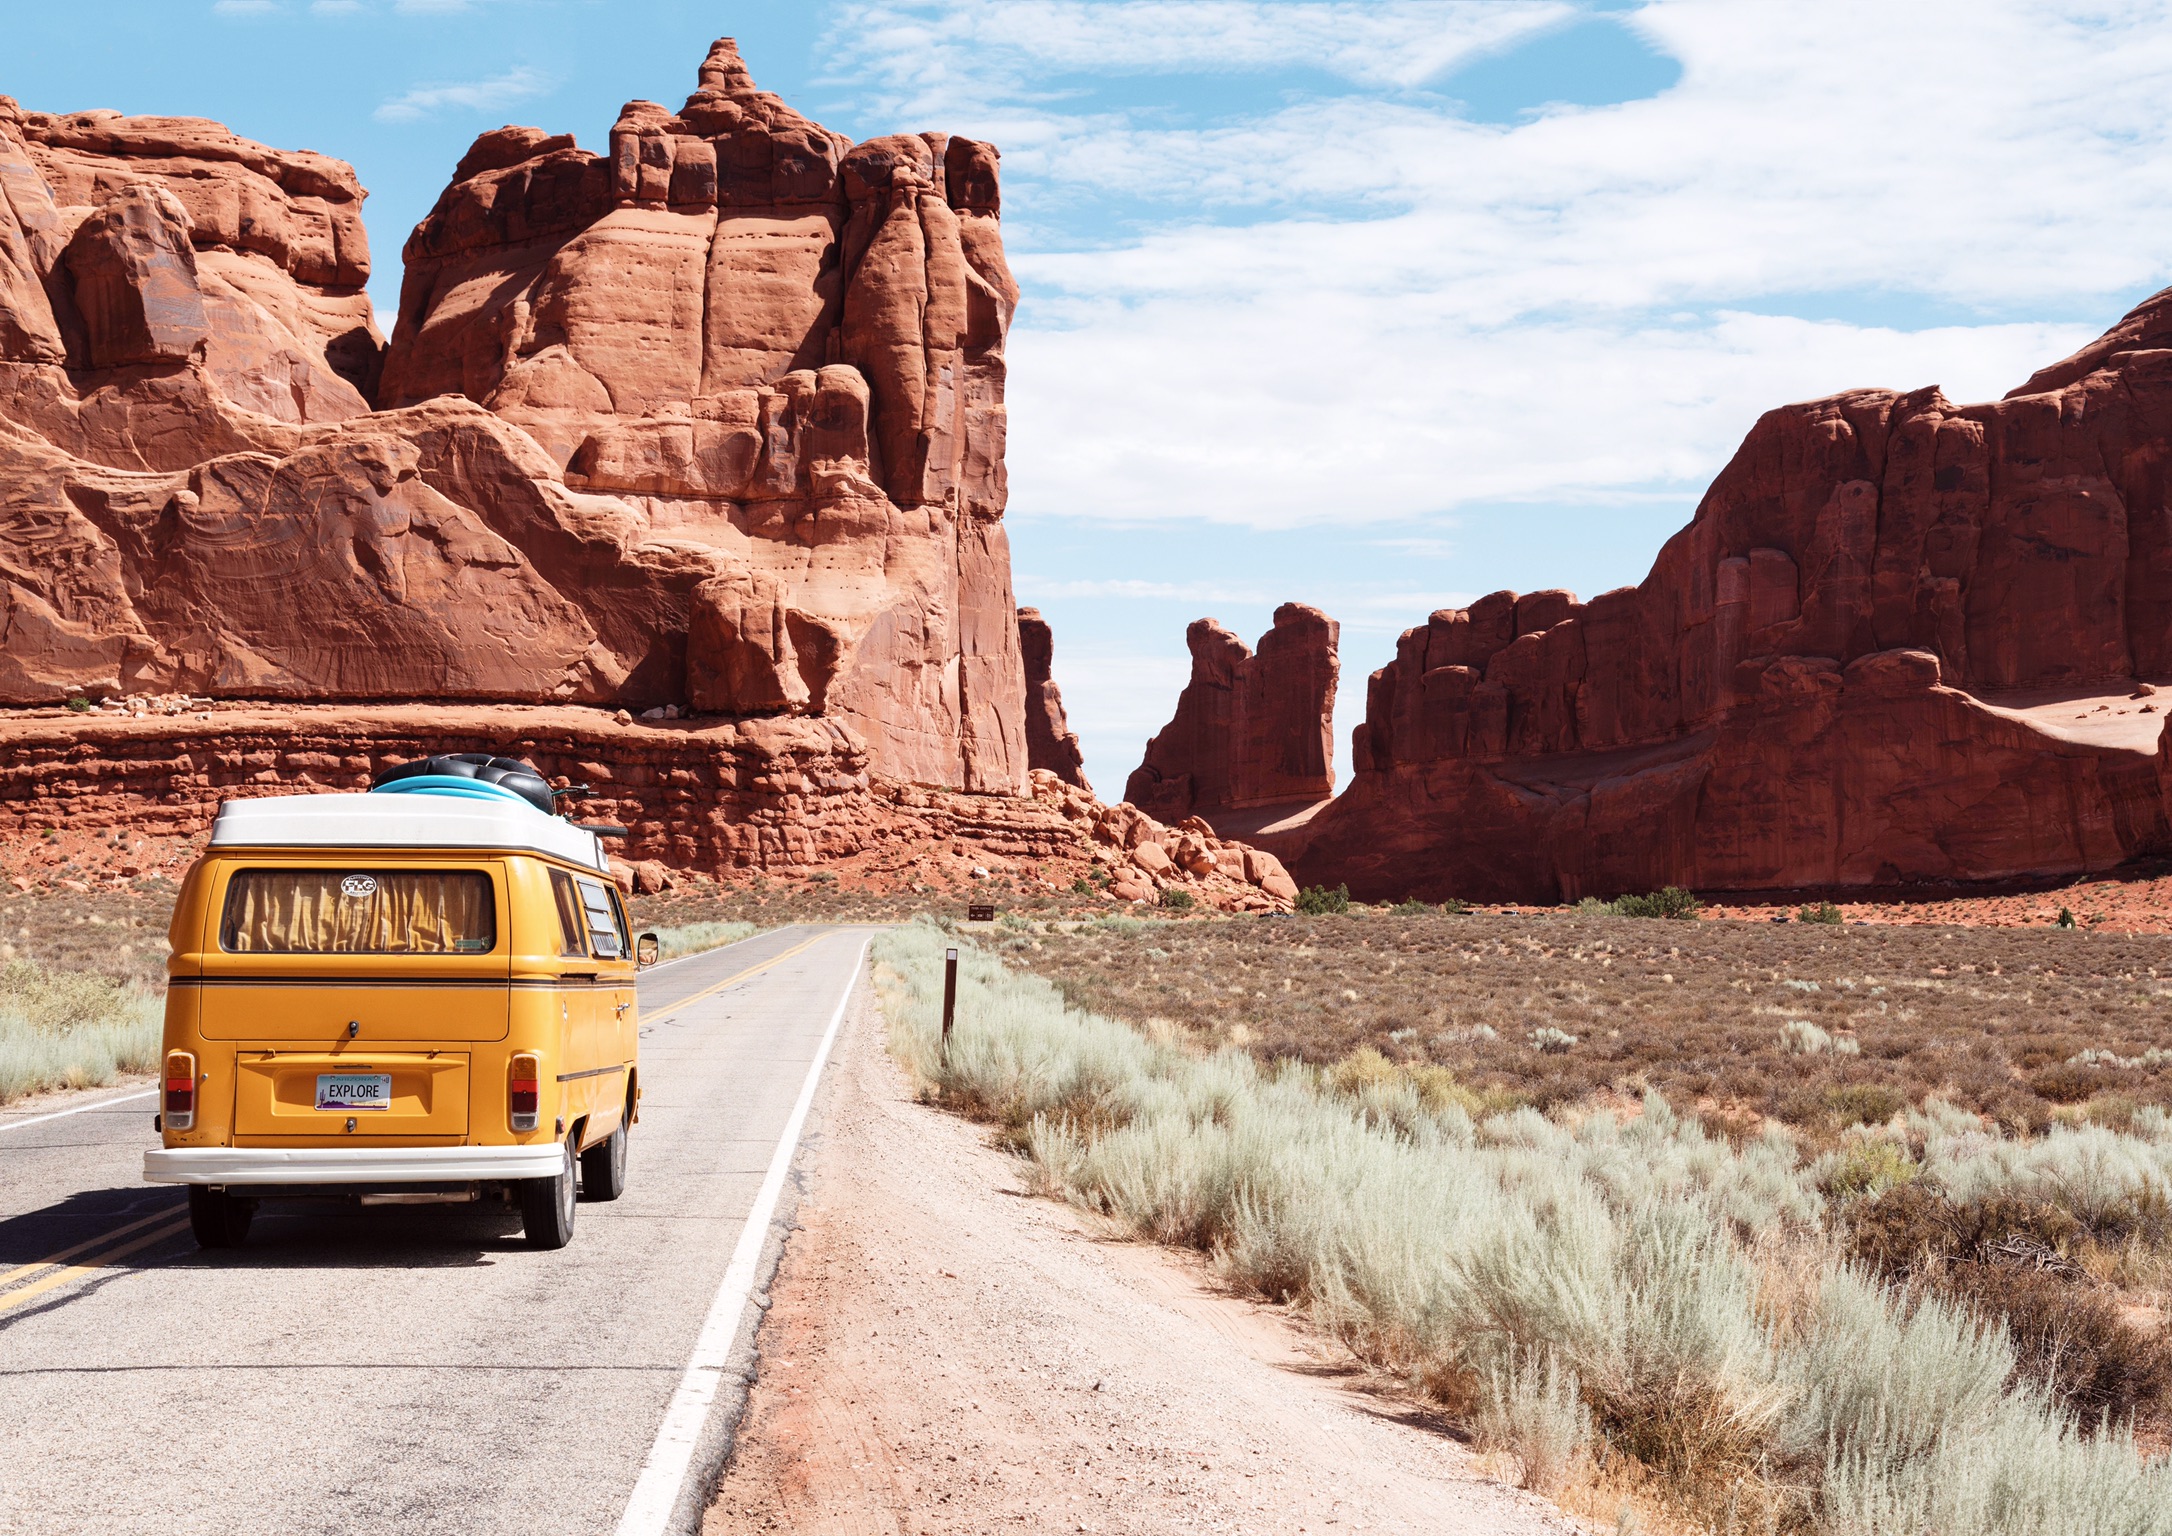 A mustard-coloured Volkswagen van on a road in front of the tall red rock formations in Arches National Park.